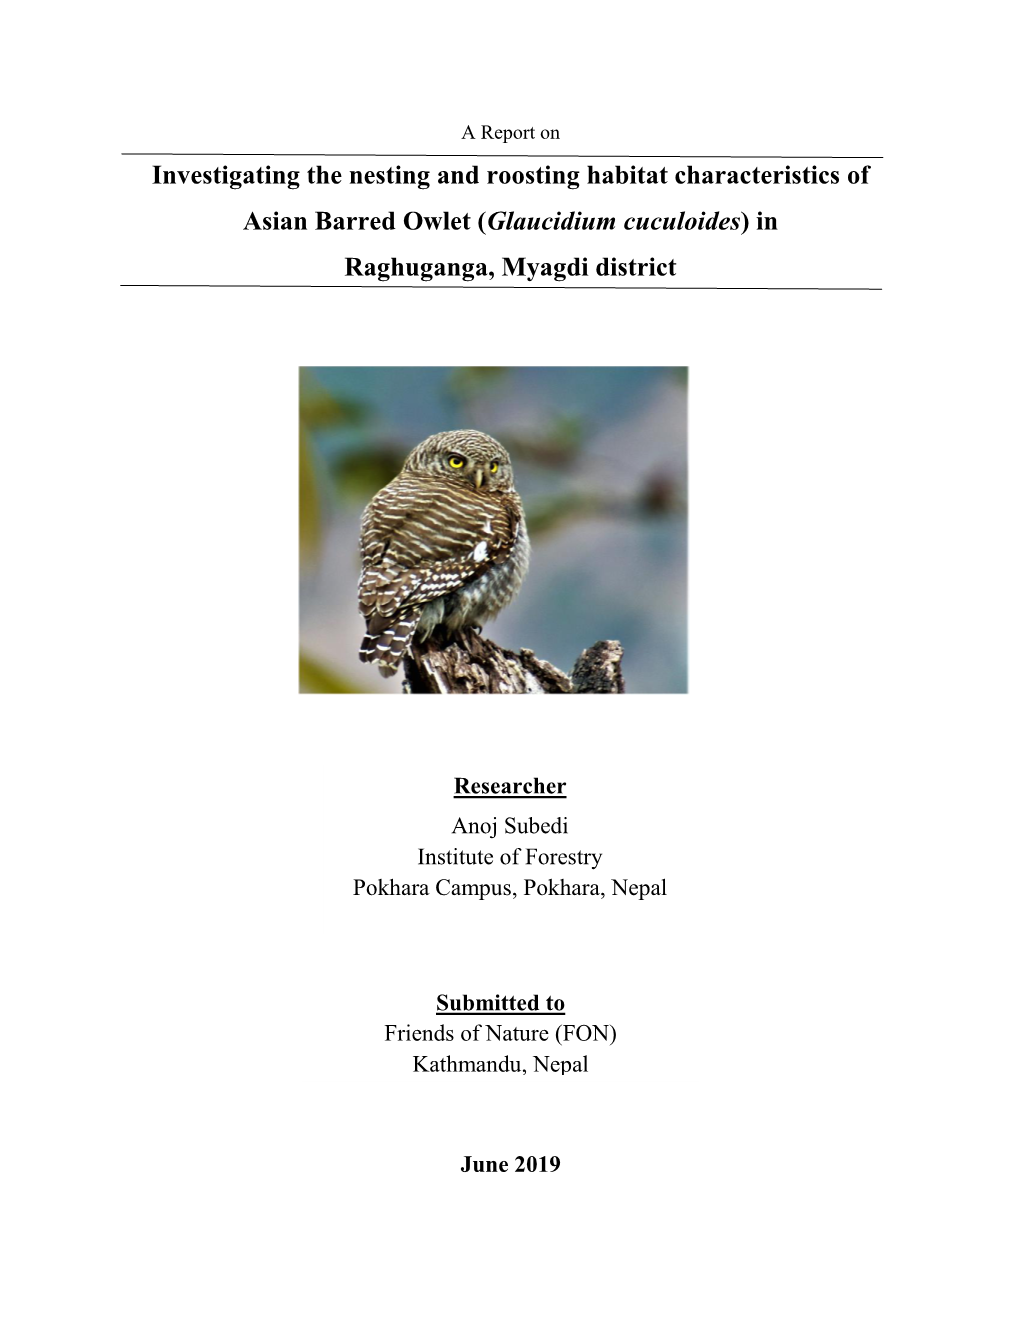 Investigating the Nesting and Roosting Habitat of Asian Barred Owlet.Pdf